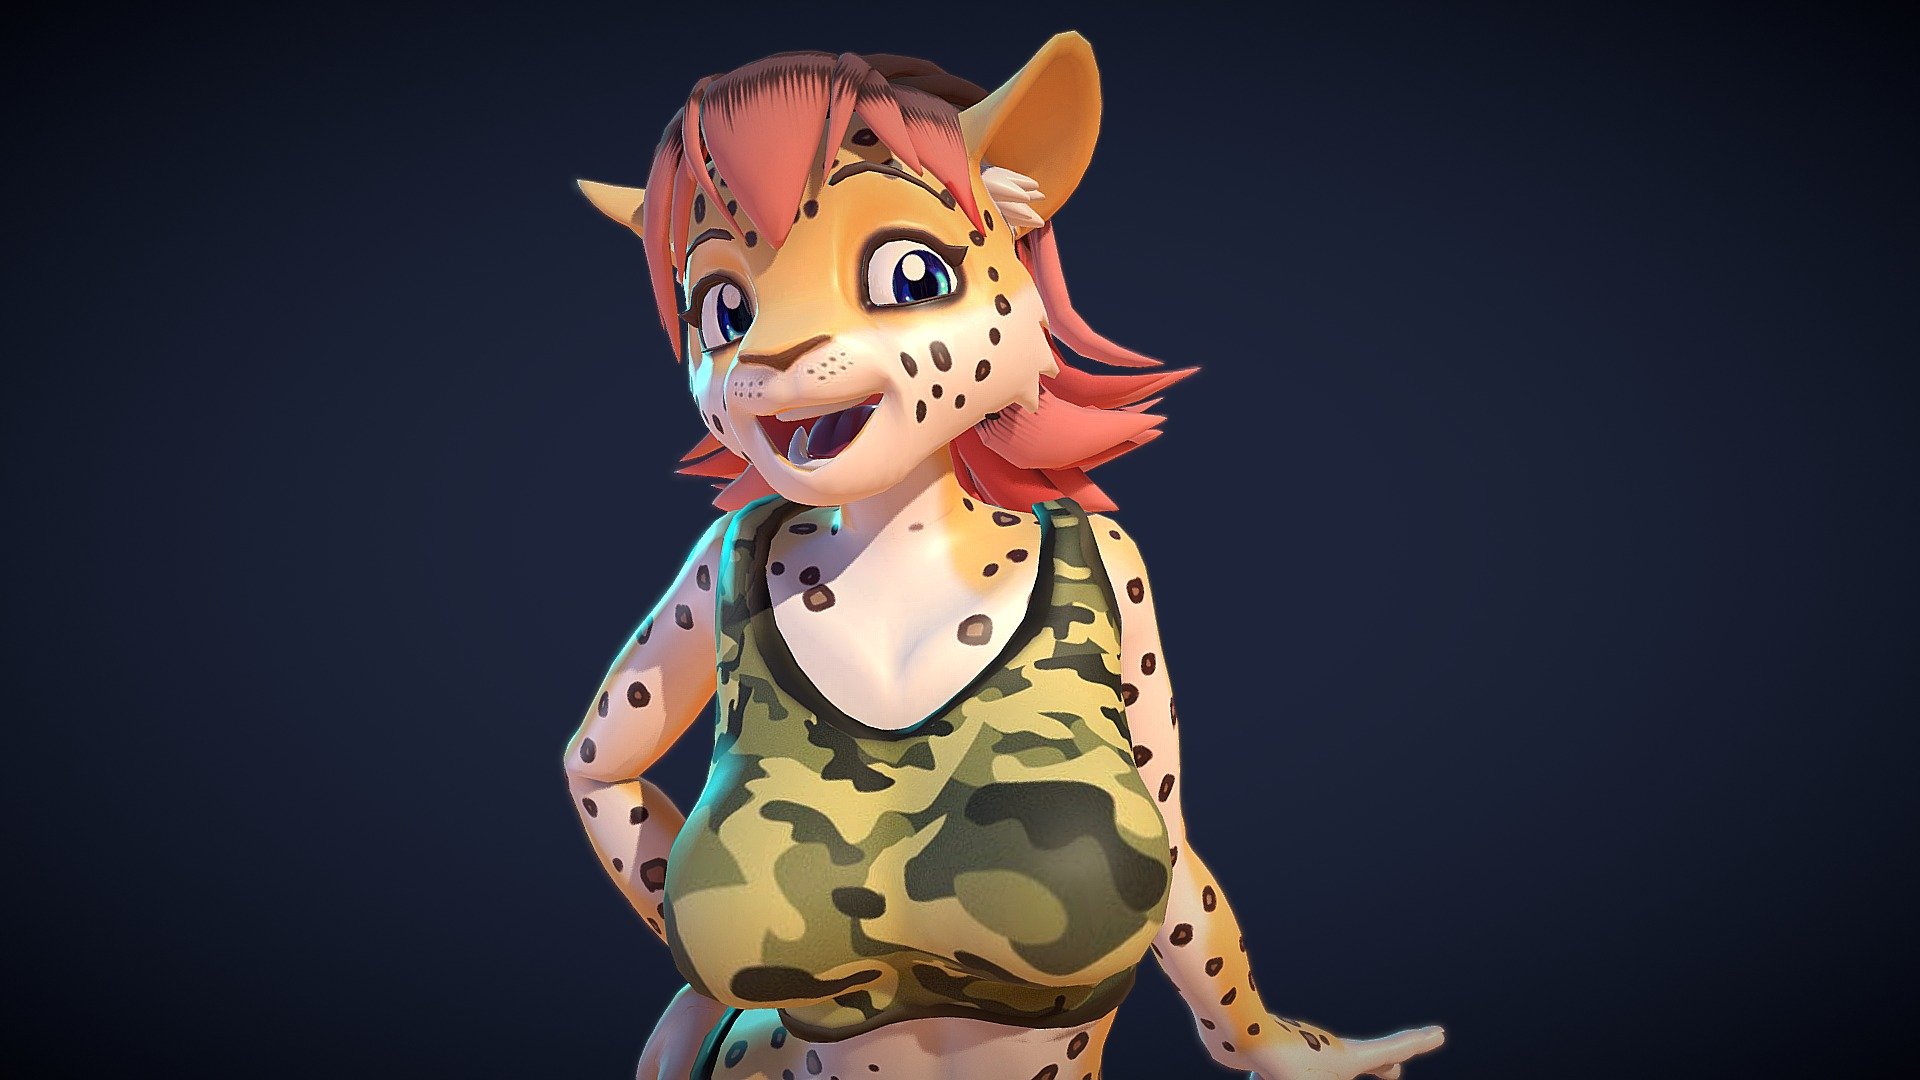 Leopard Girl Furry Buy Royalty Free 3d Model By Magnaomega A2fabbc Sketchfab Store